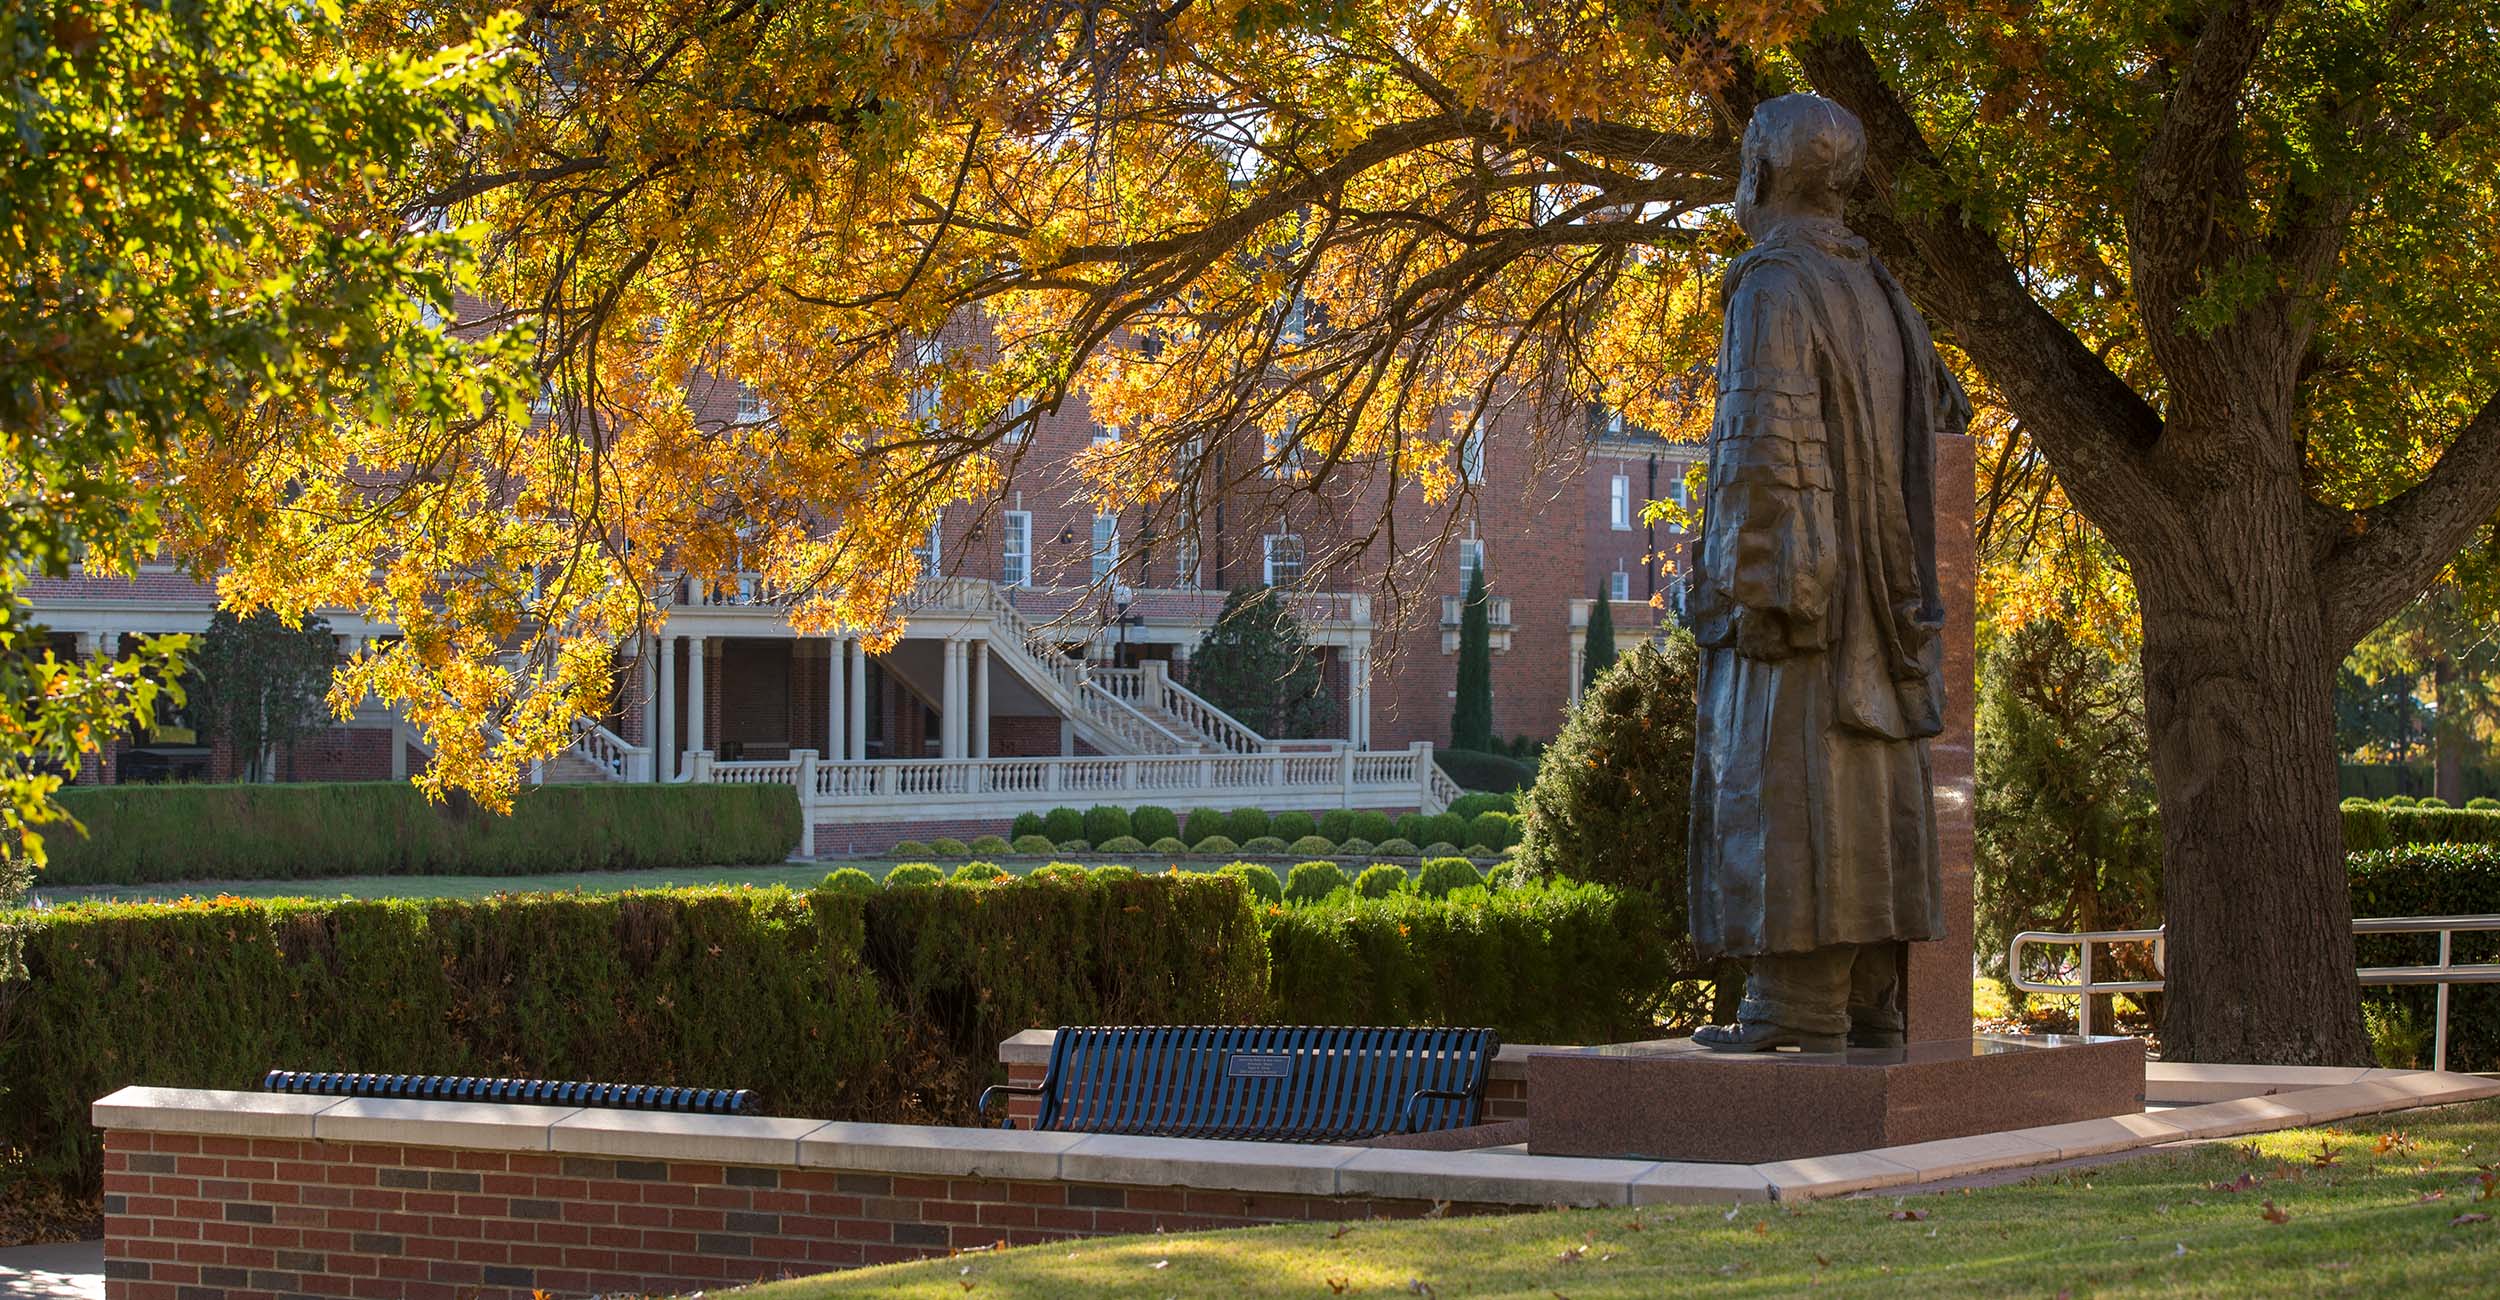 A photo of the Henry Bennett statue on campus.